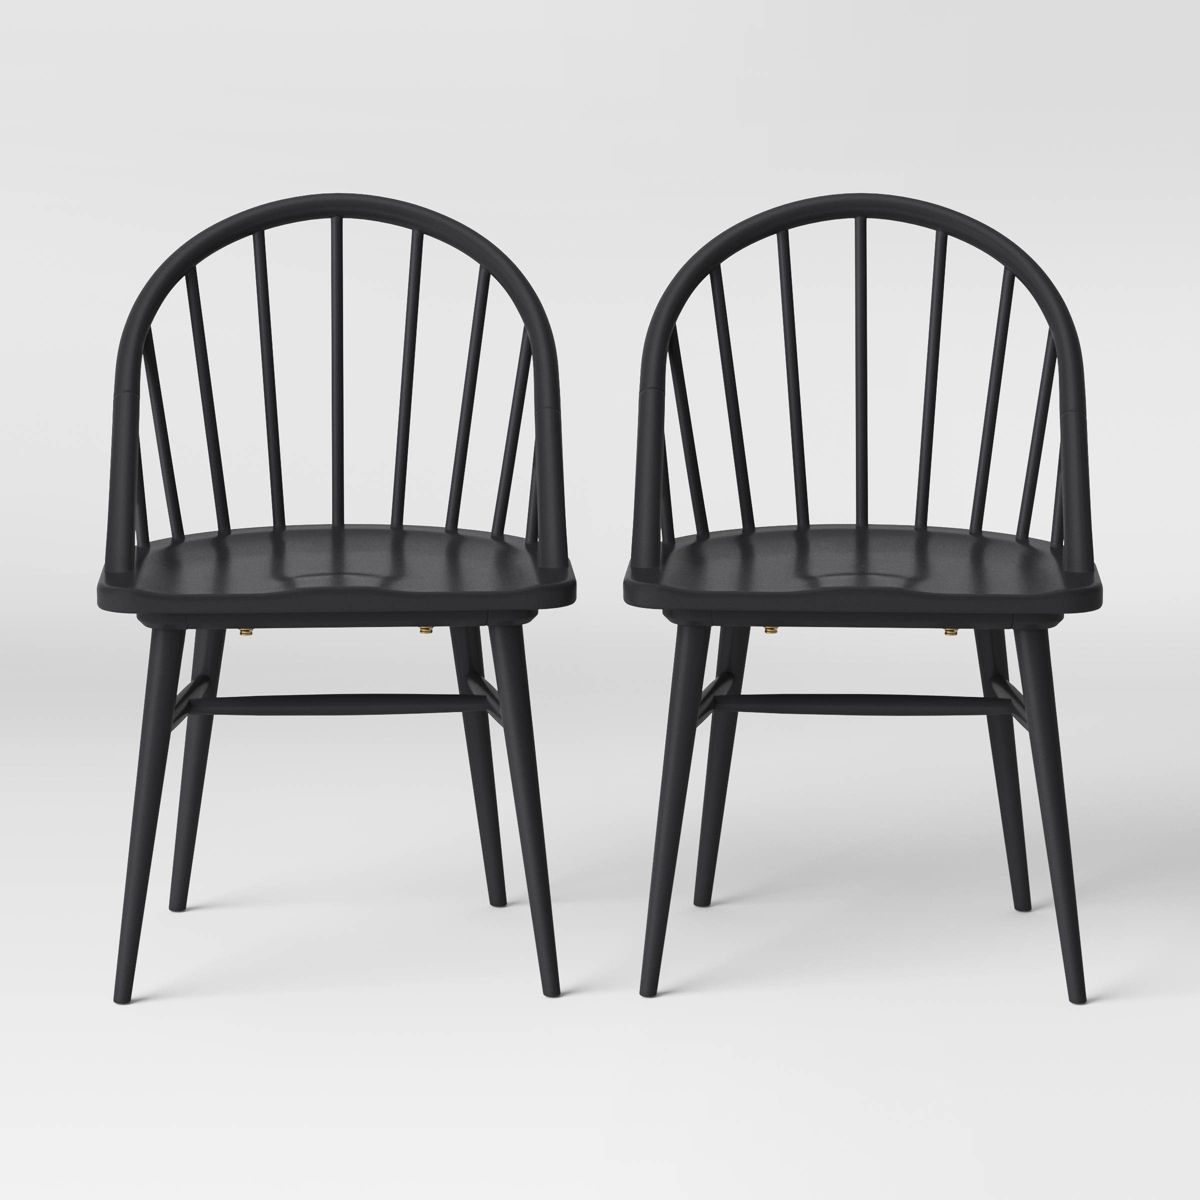 2pk Adwolf Rounded Spindle Dining Chairs Black - Threshold™ | Target